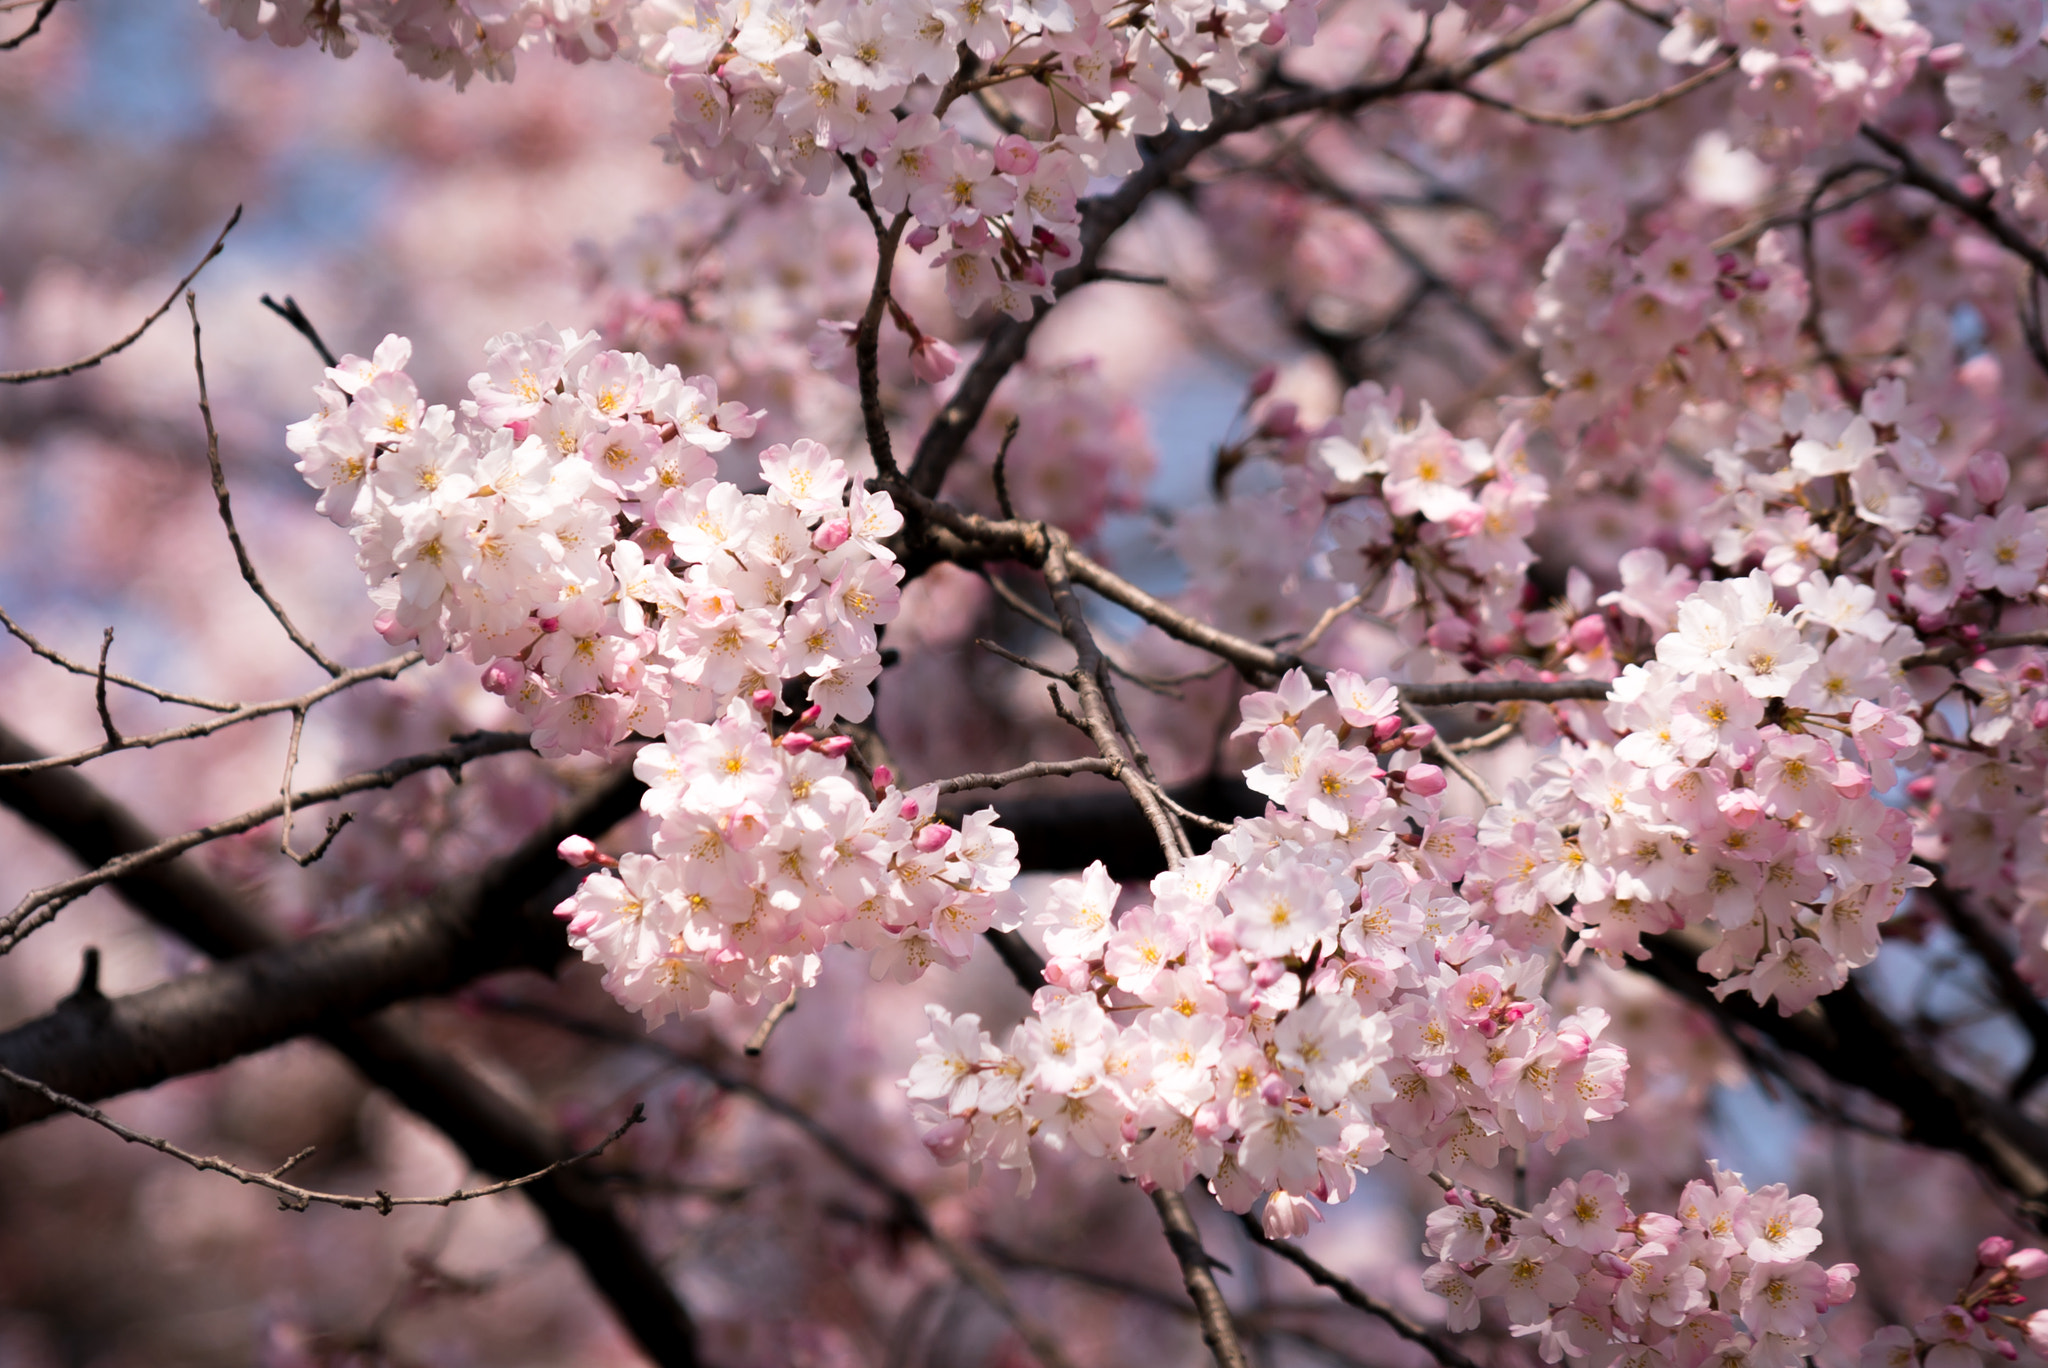 Sony a7S II sample photo. Cherry blossoms お花見, tokyo 2017 photography